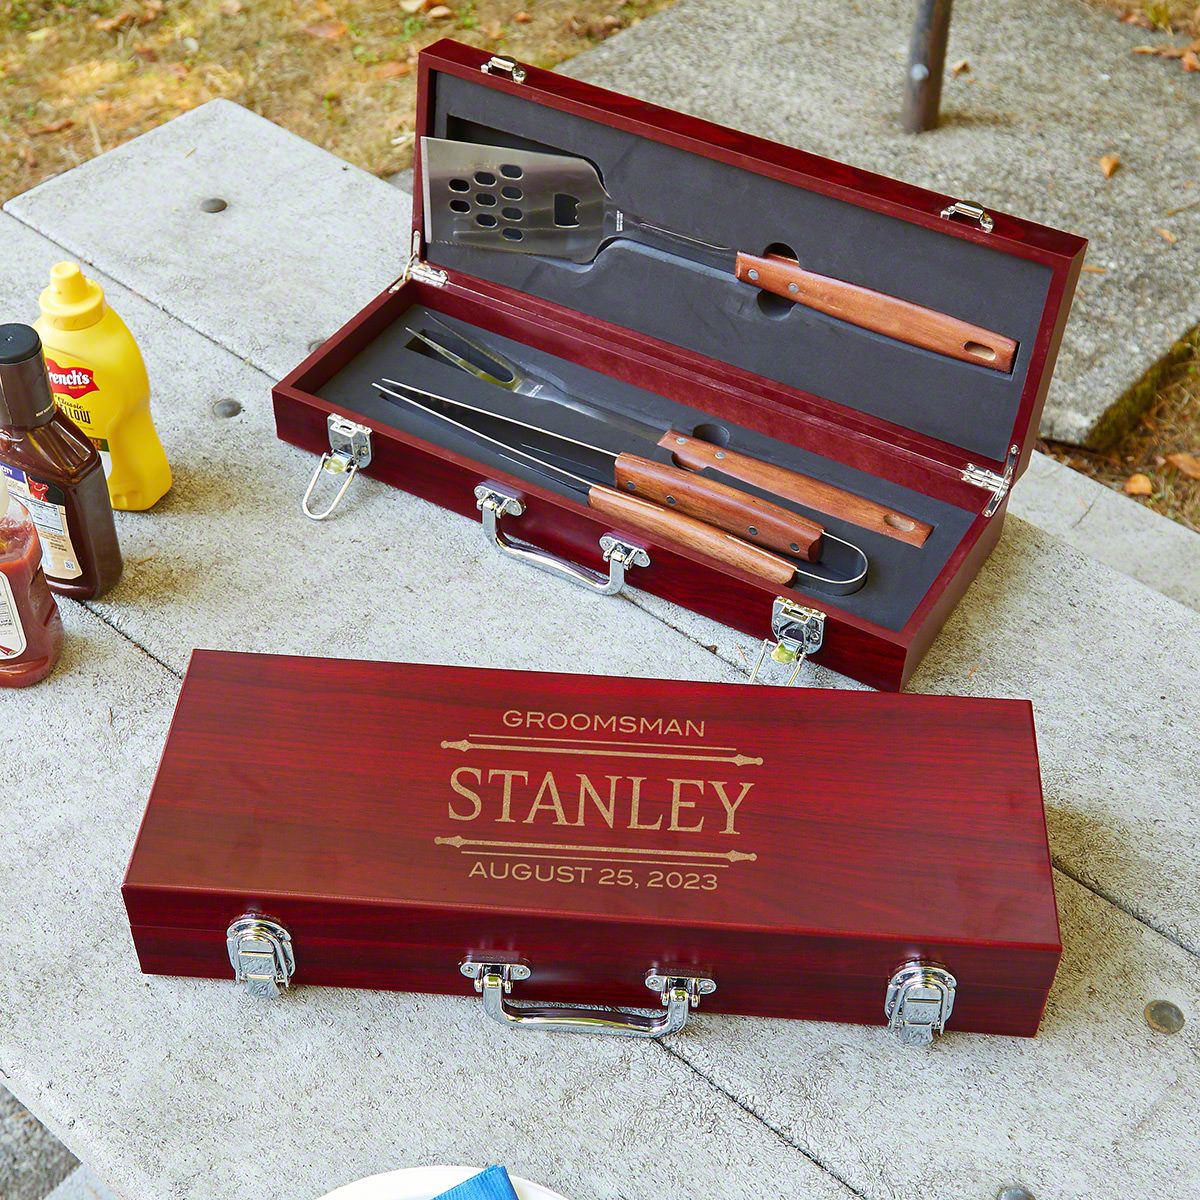 https://images.homewetbar.com/media/catalog/product/7/1/7141-stanford-rosewood-grill-set-primary_up-9-20.jpg?store=default&image-type=image